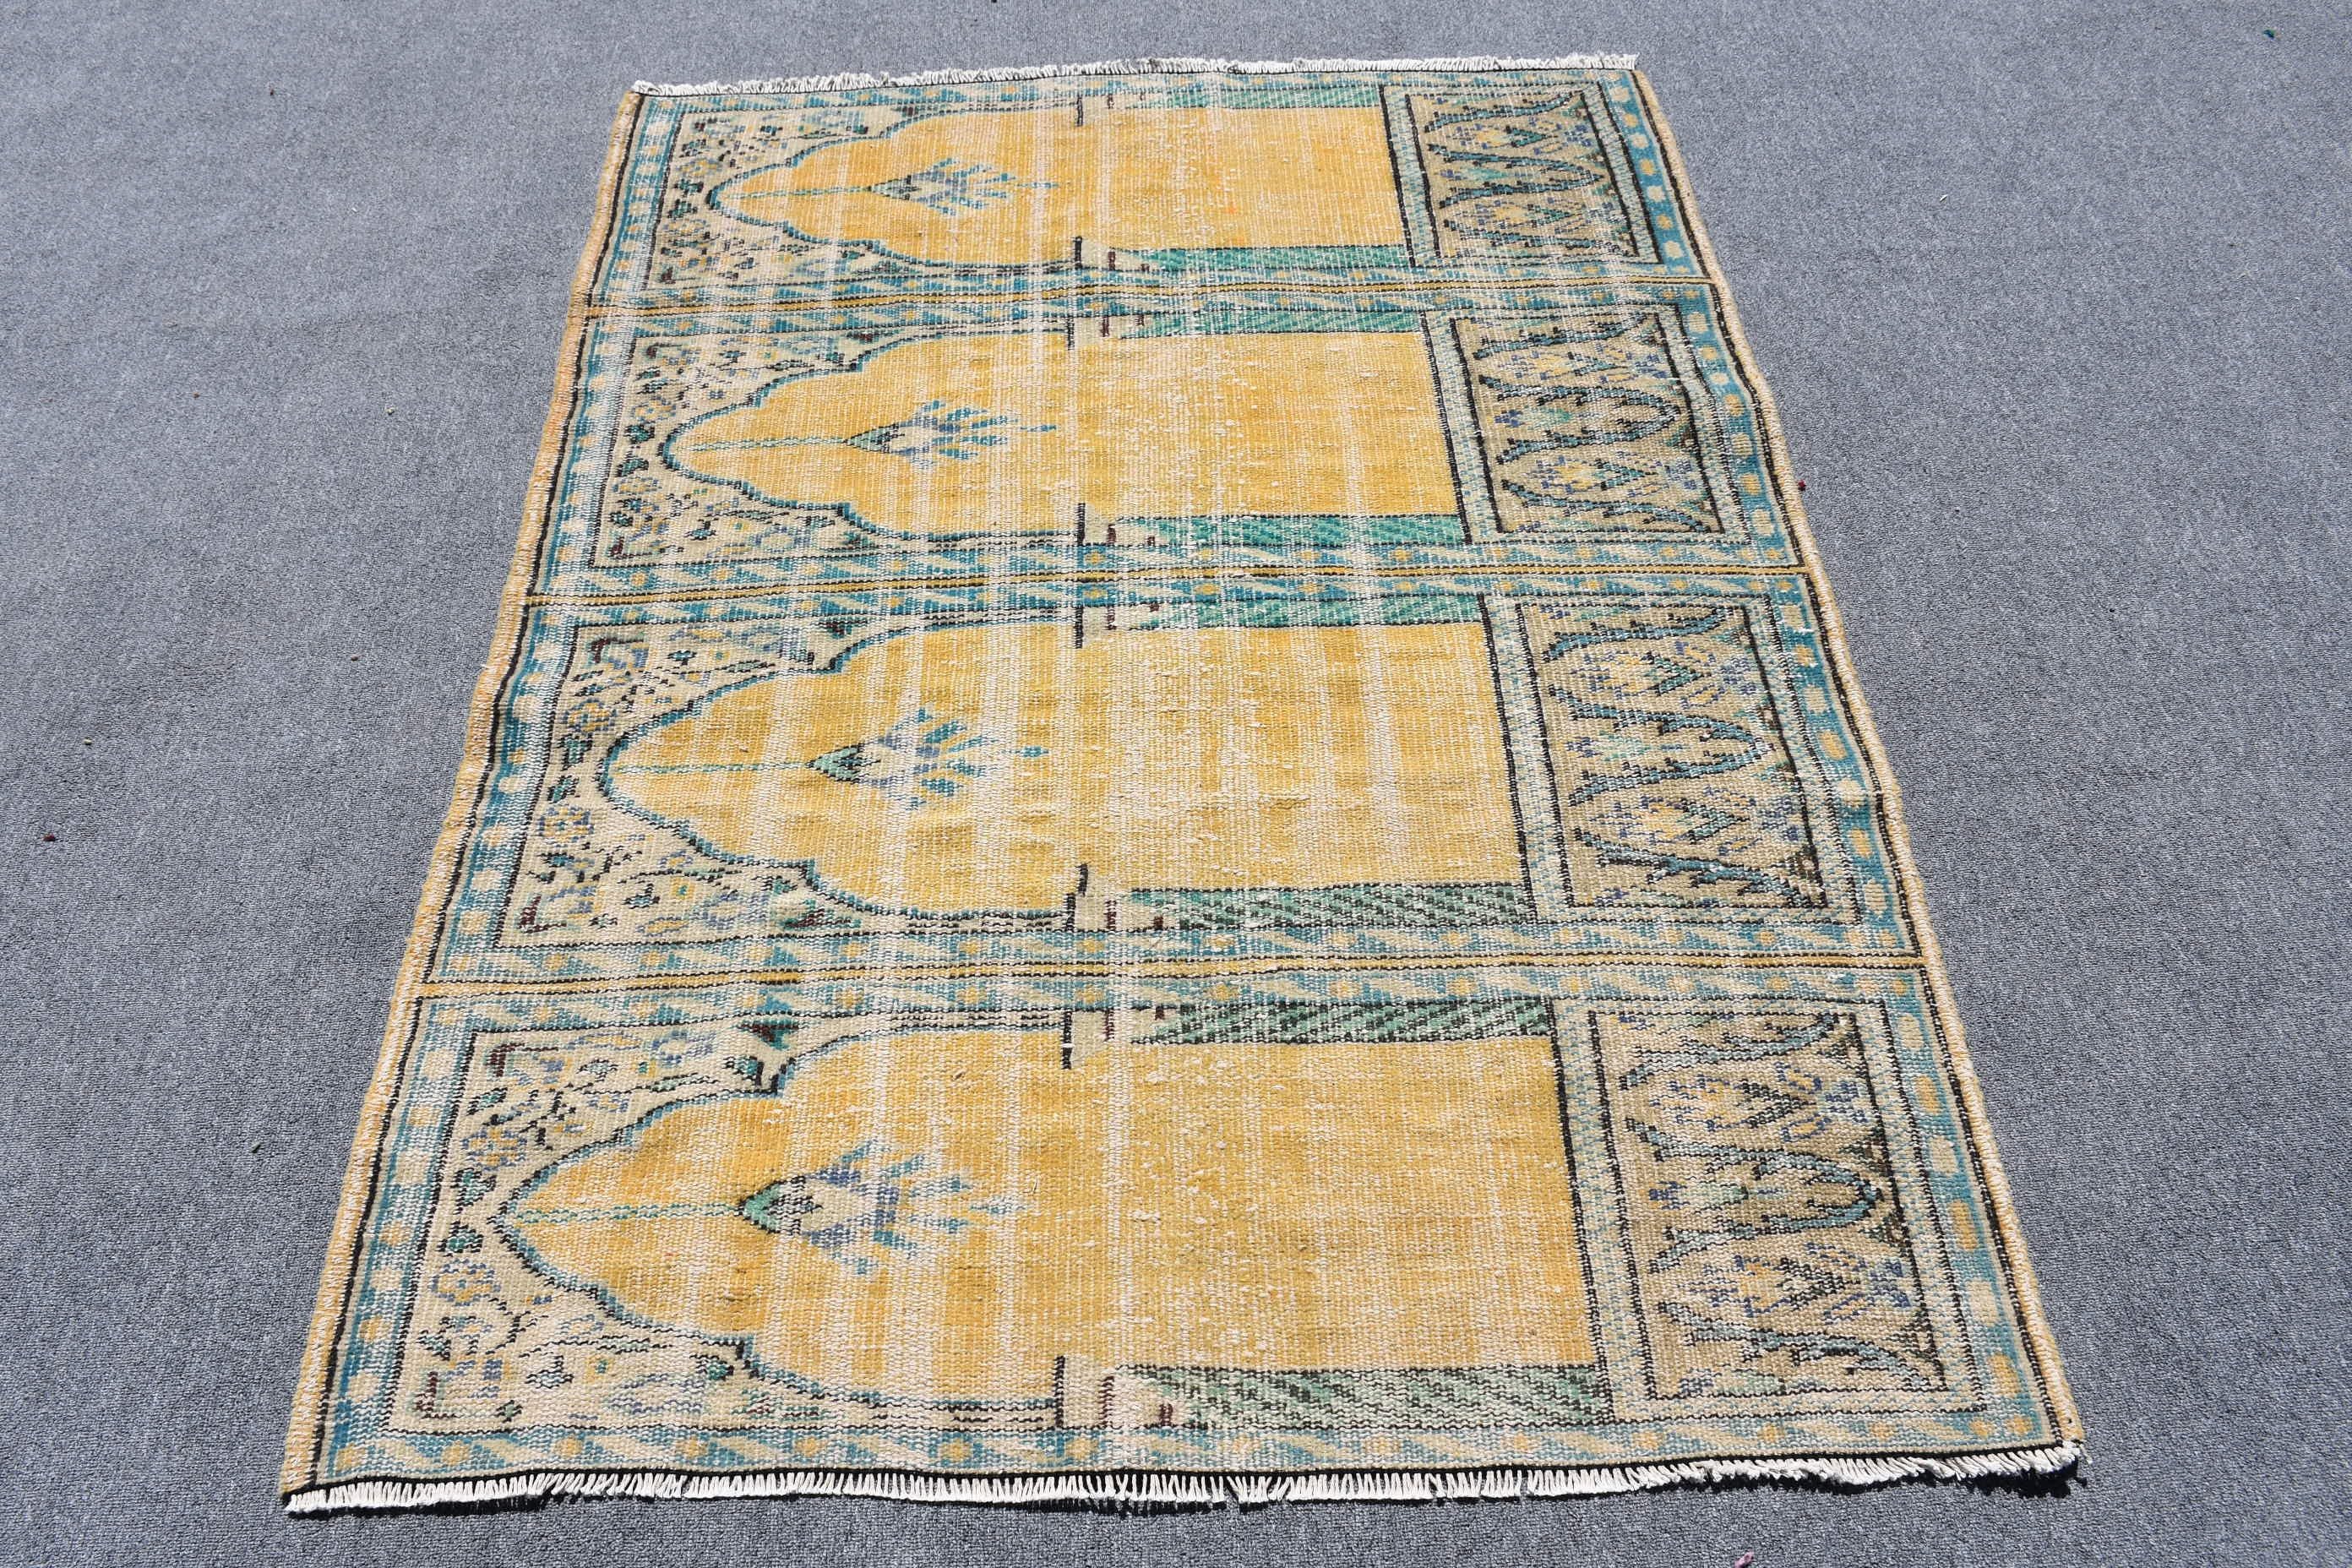 Entry Rug, Turkish Rug, Home Decor Rug, Vintage Rug, Wool Rug, 4x5.2 ft Accent Rugs, Yellow Floor Rug, Bedroom Rugs, Rugs for Entry